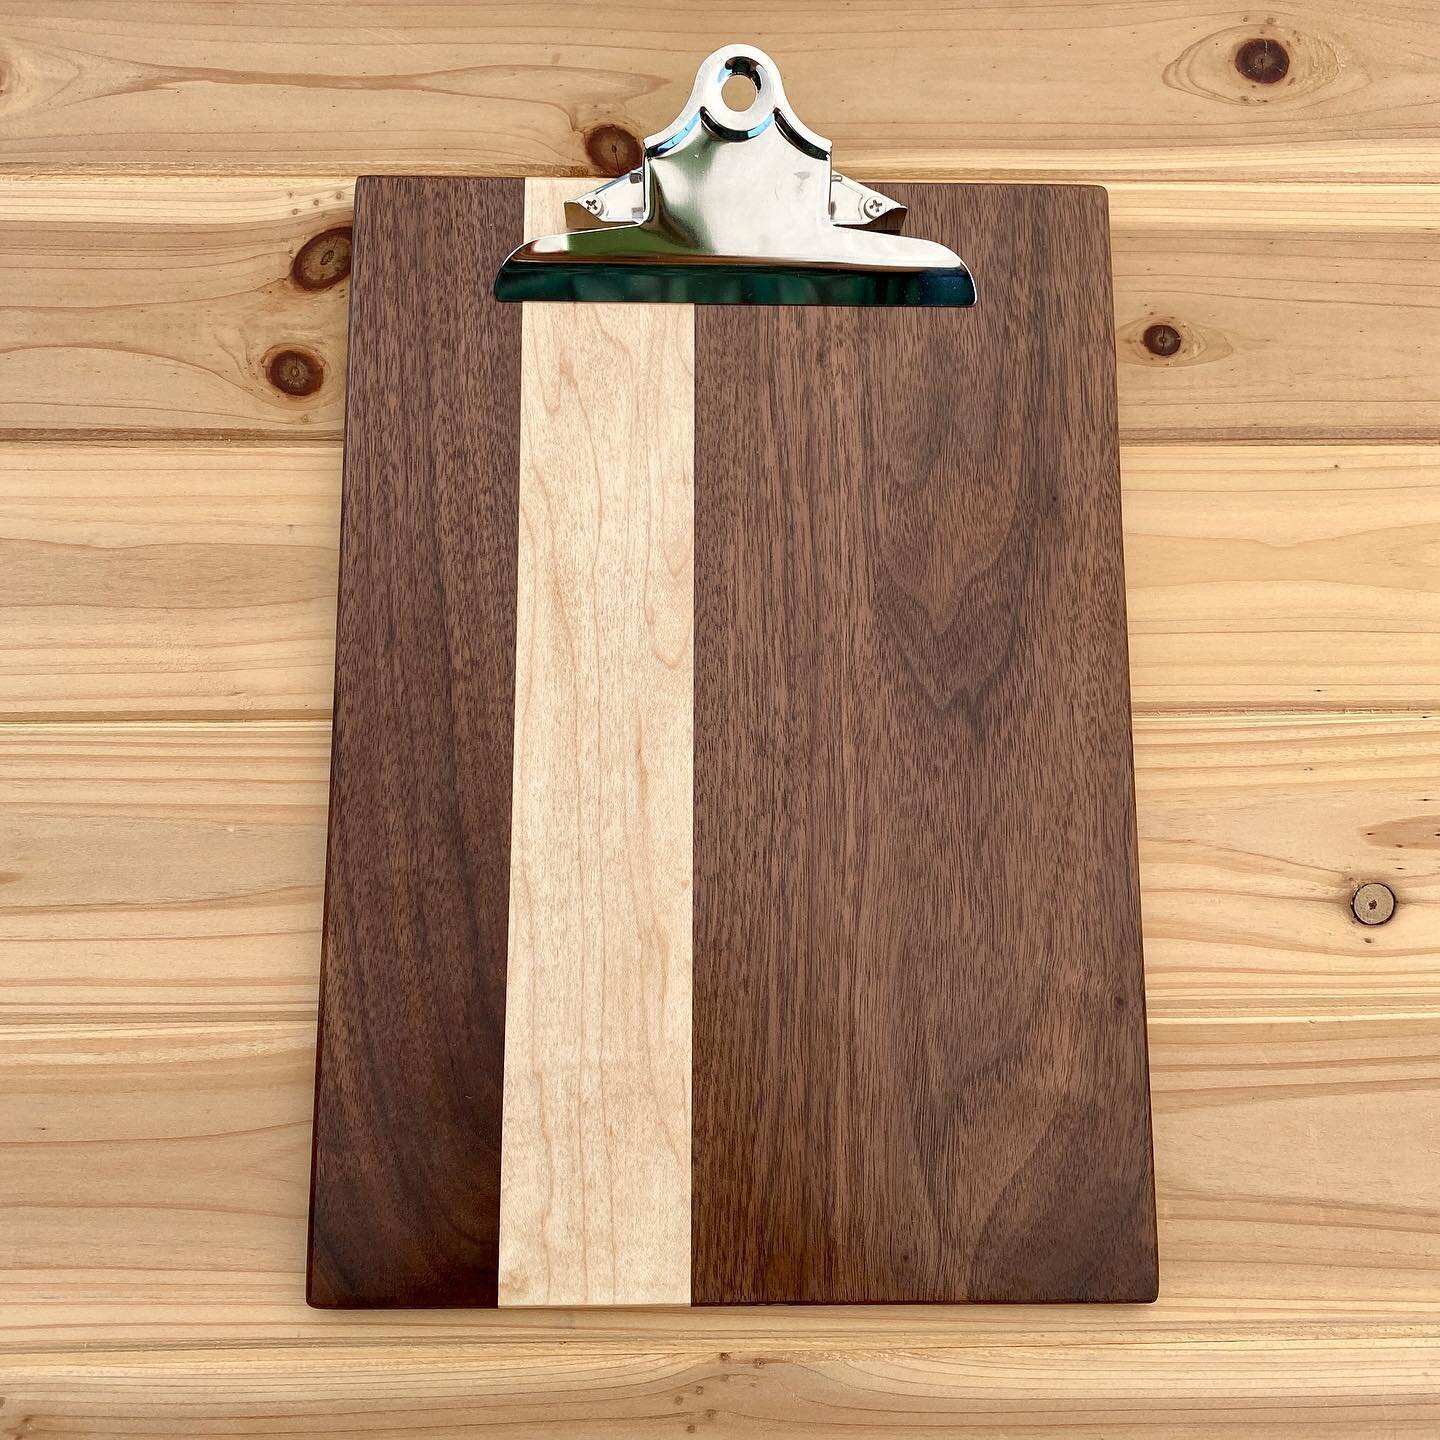 I made this walnut and maple clipboard as a christmas present, and now that it&rsquo;s been gifted I can post it! Finished with @zinsser #bullseyeshellac A simple project that came out great. 
.
.
.
.
.
#widenwoodworks #woodworking #wood #woodwork #s